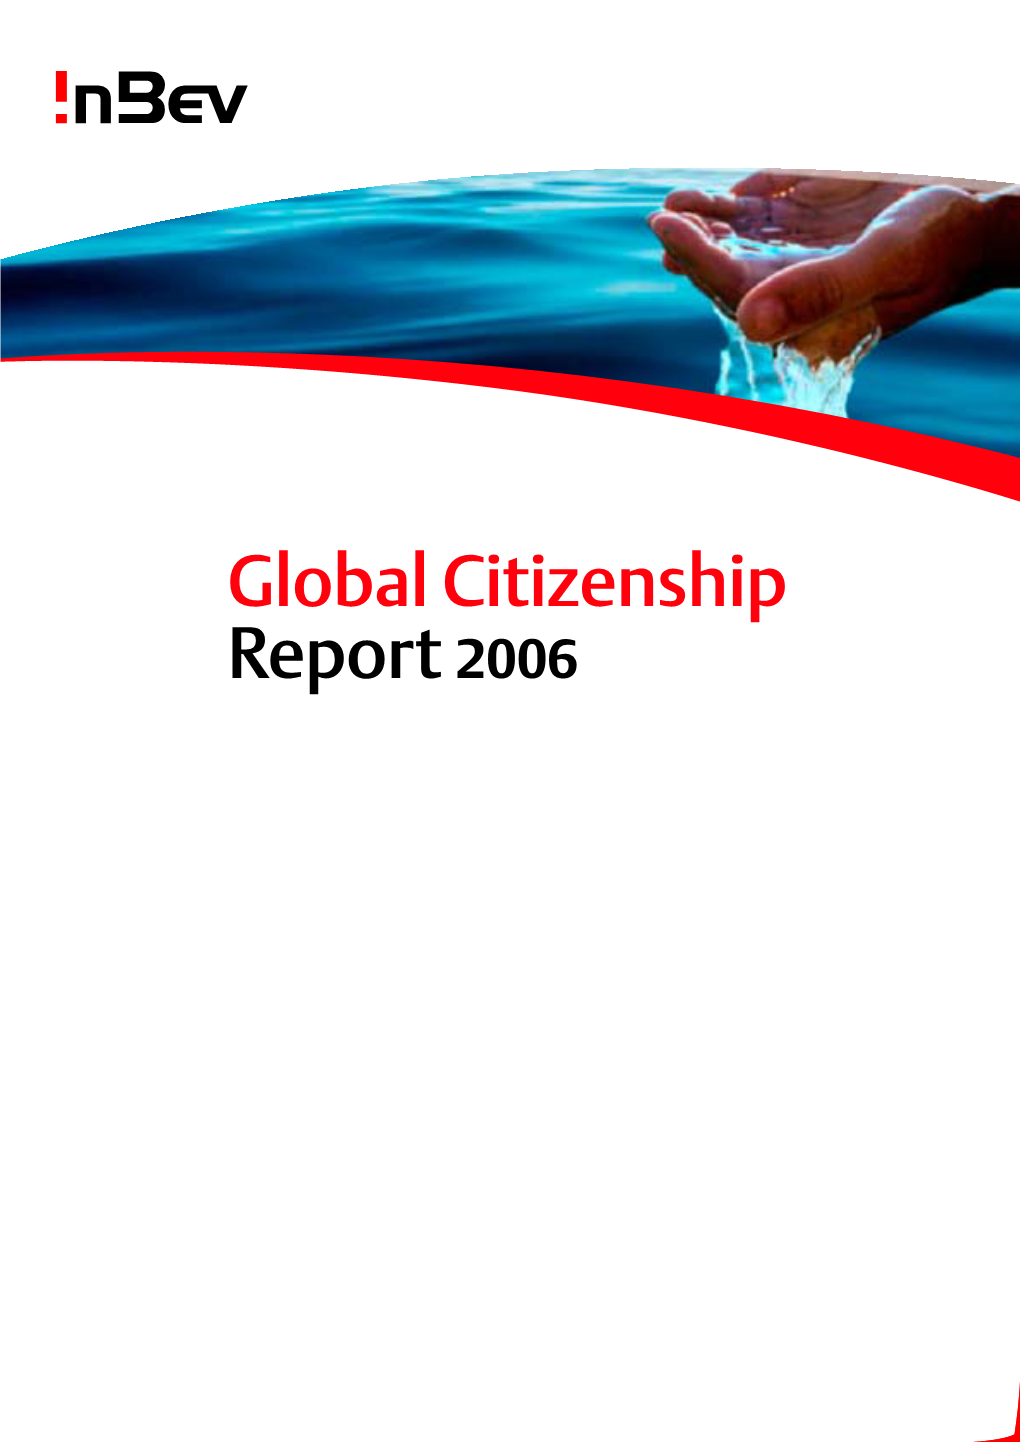 Global Citizenship Report 2006 What’S Interesting ?